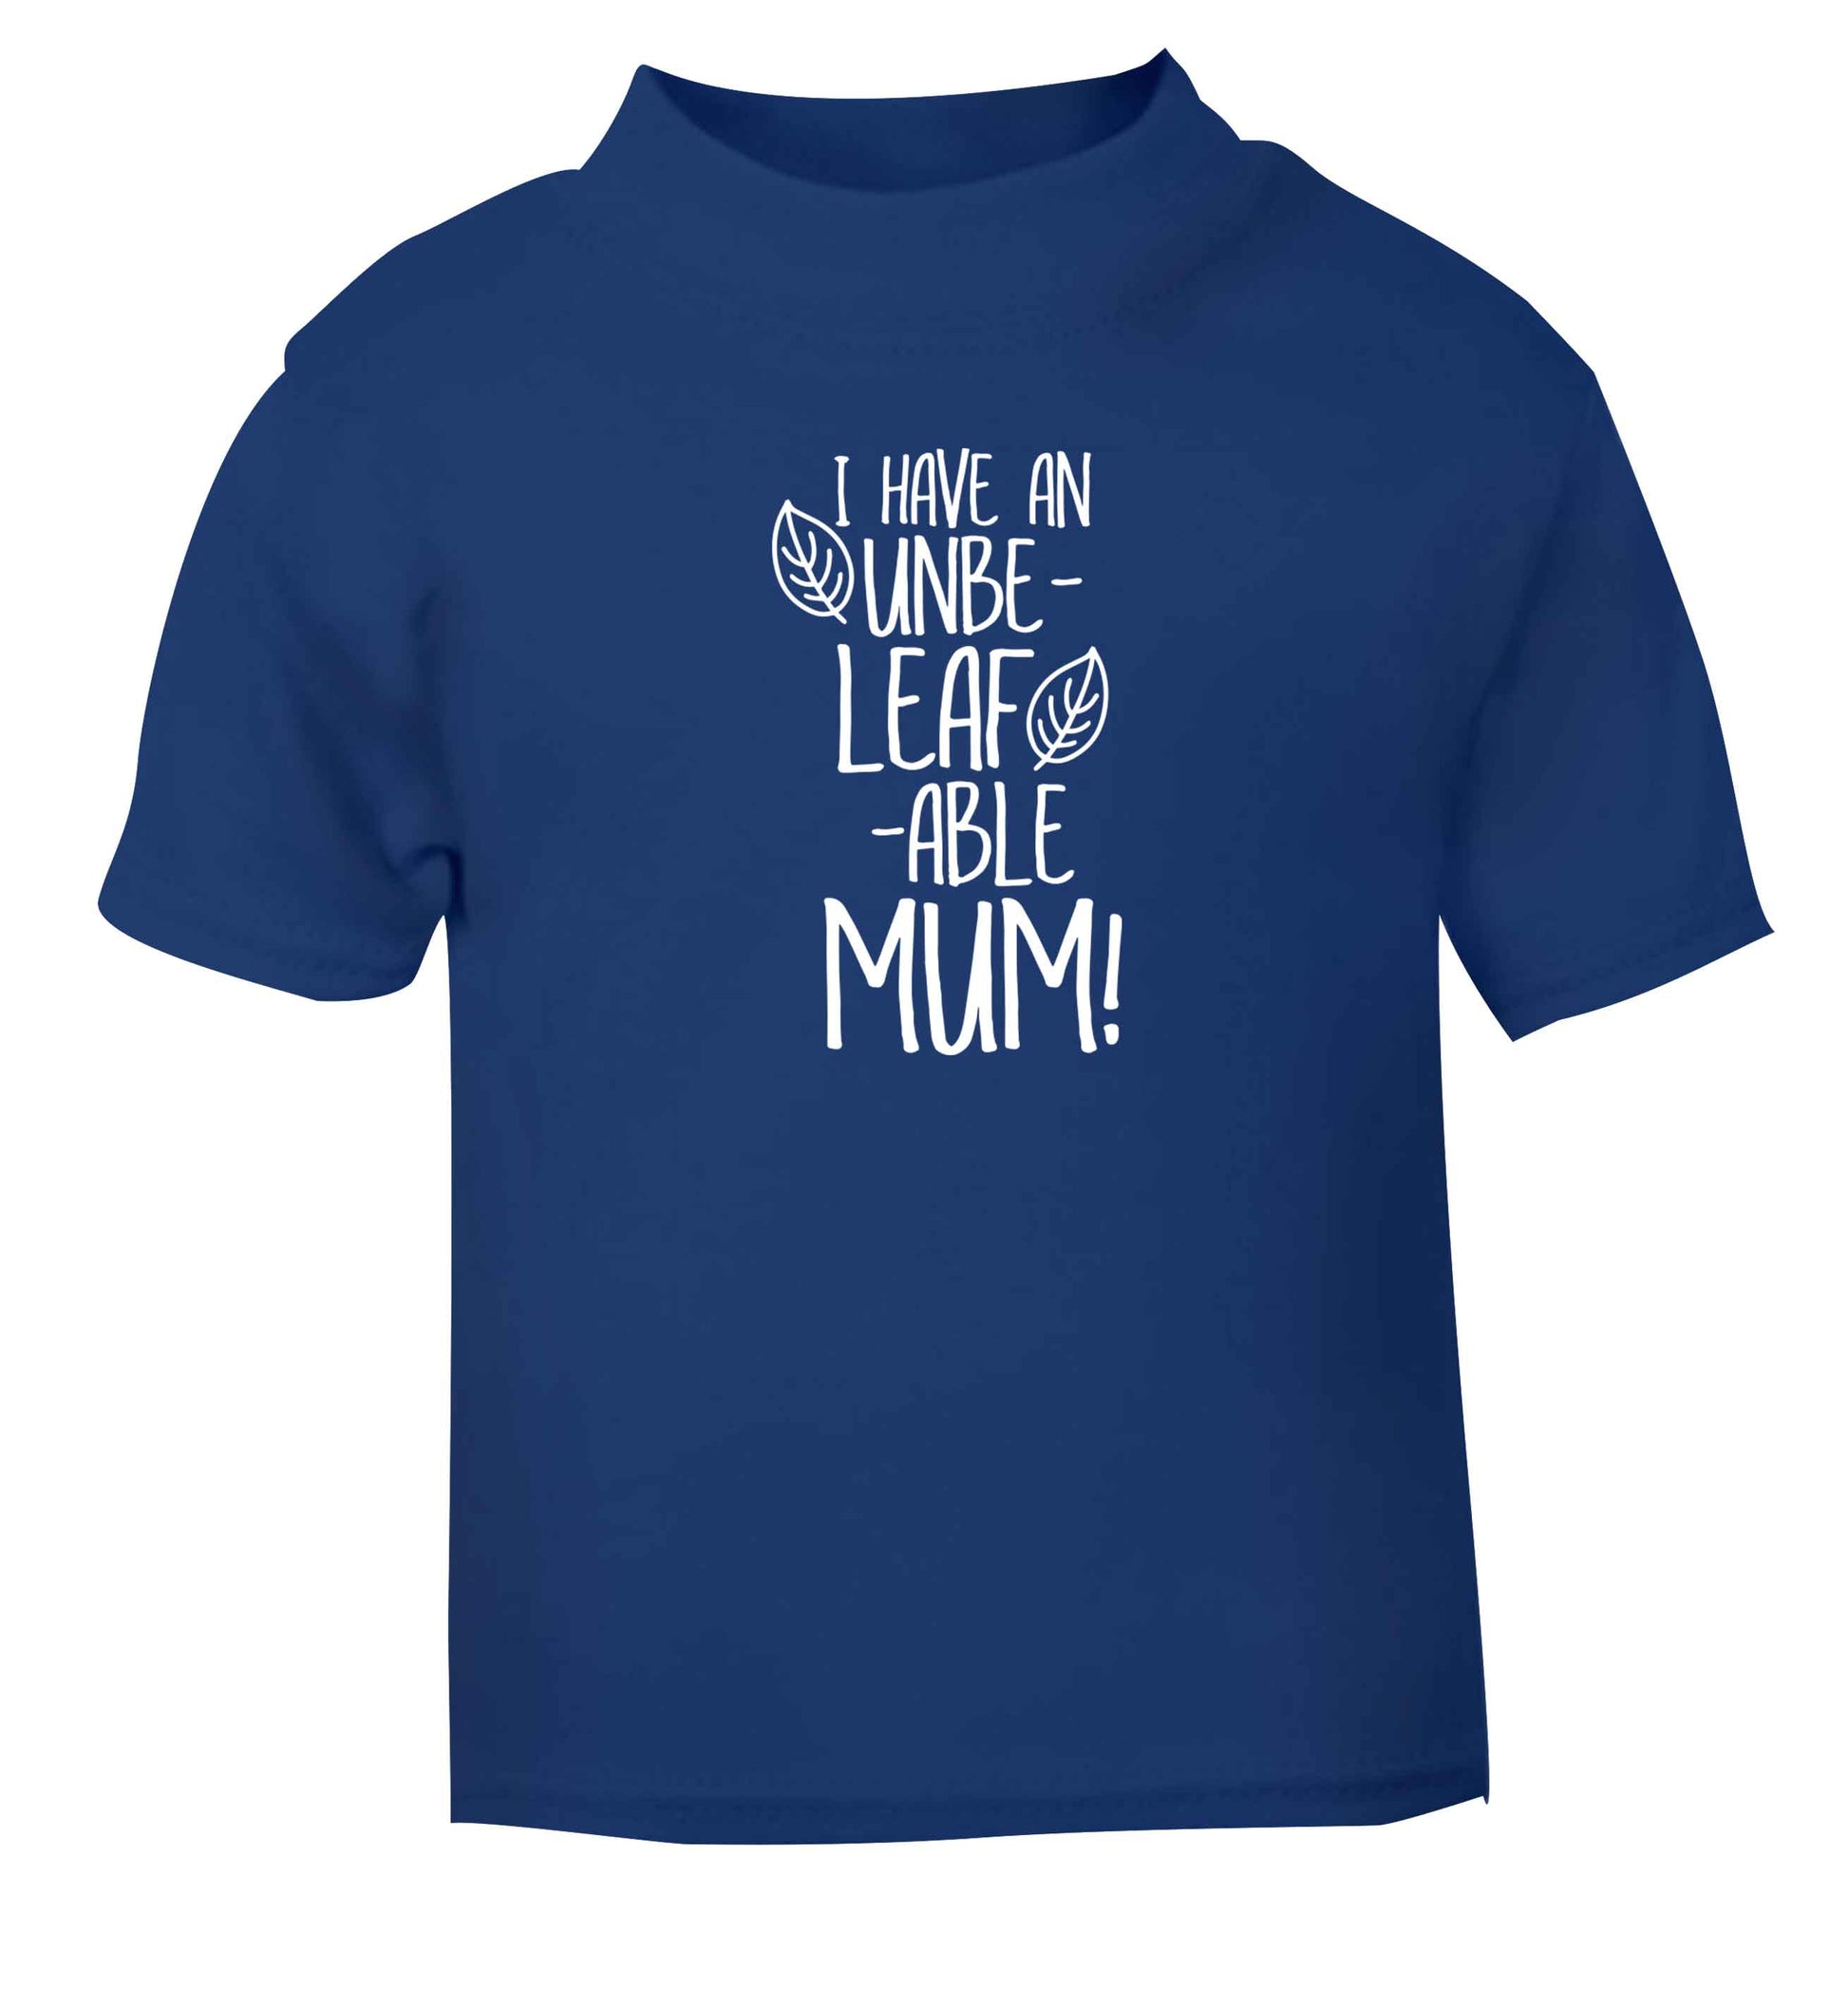 I have an unbeleafable mum! blue baby toddler Tshirt 2 Years